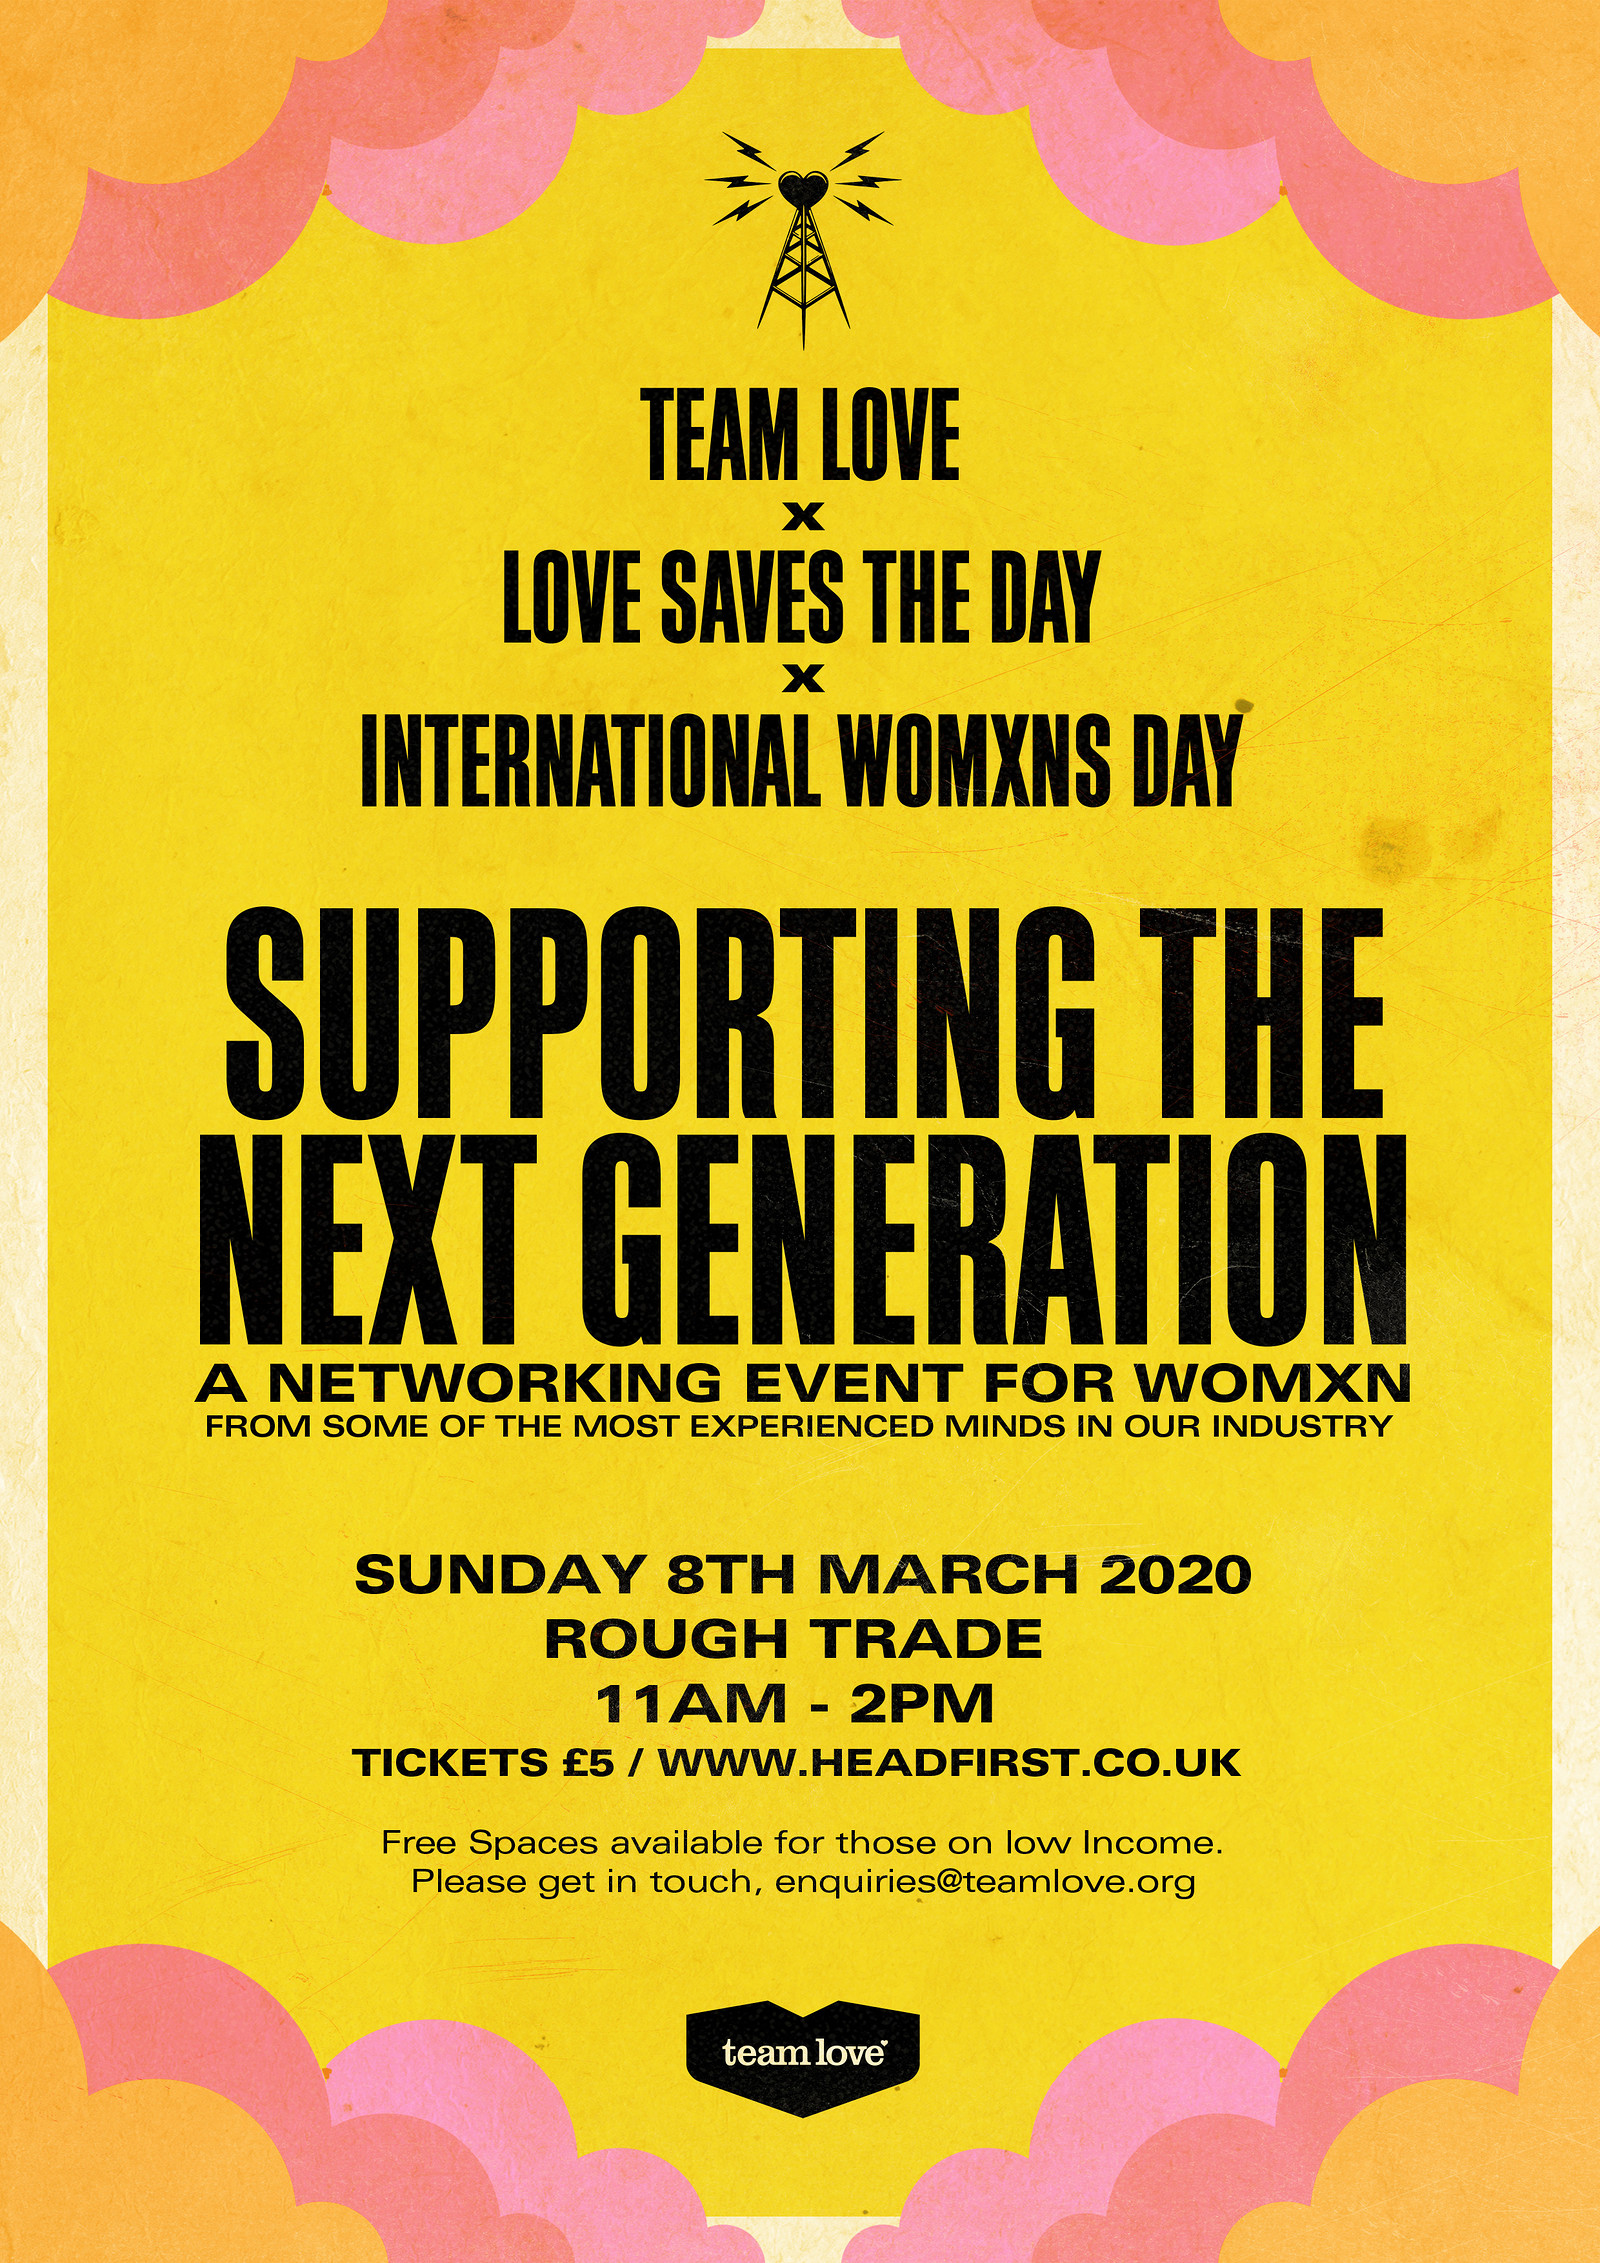 Team Love X LSTD // Supporting the Next Generation at Rough Trade Bristol